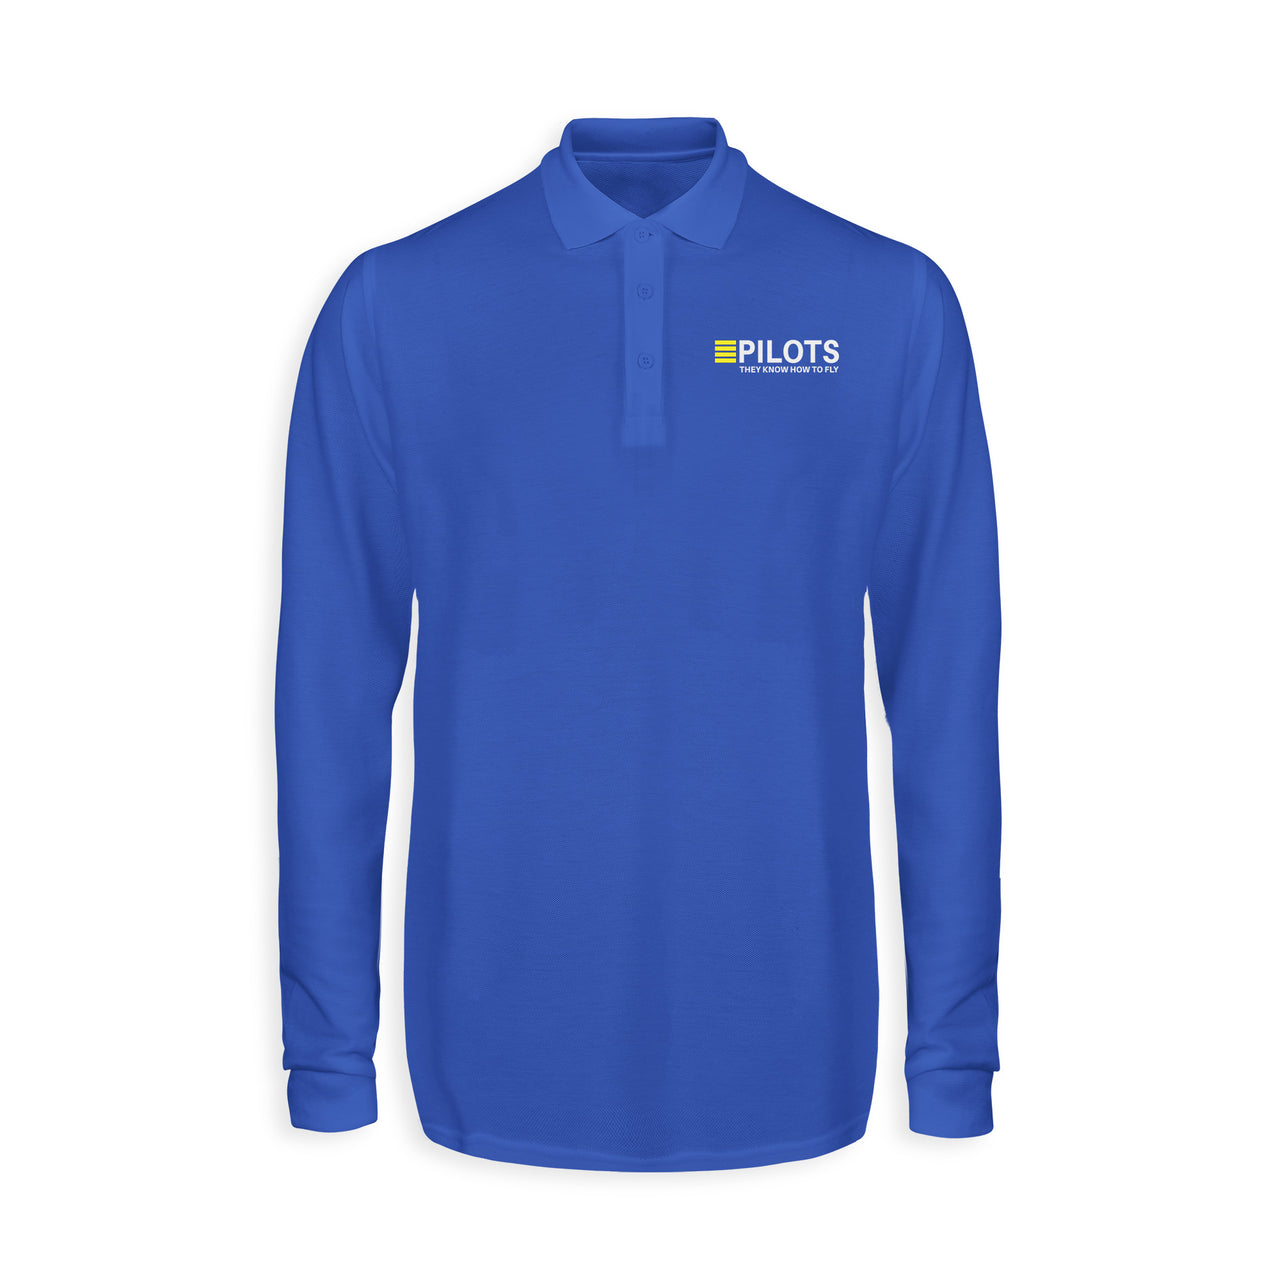 Pilots They Know How To Fly Designed Long Sleeve Polo T-Shirts